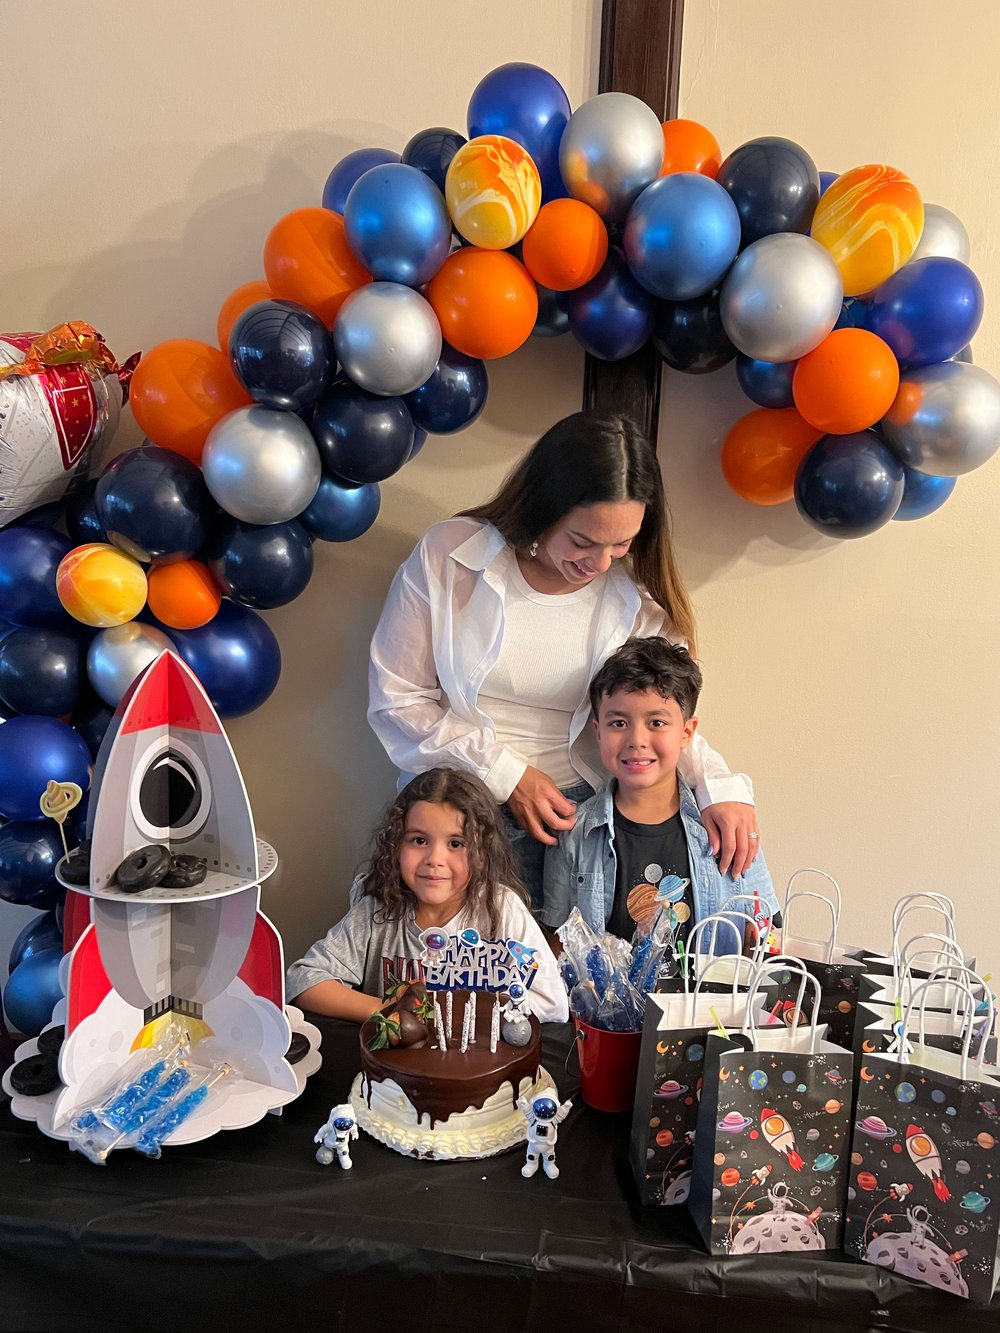 Space Party Ideas | outer space birthday party | space birthday party | space Photo Booth | out of this world birthday party | space party games | space birthday decoration | kids birthday party ideas